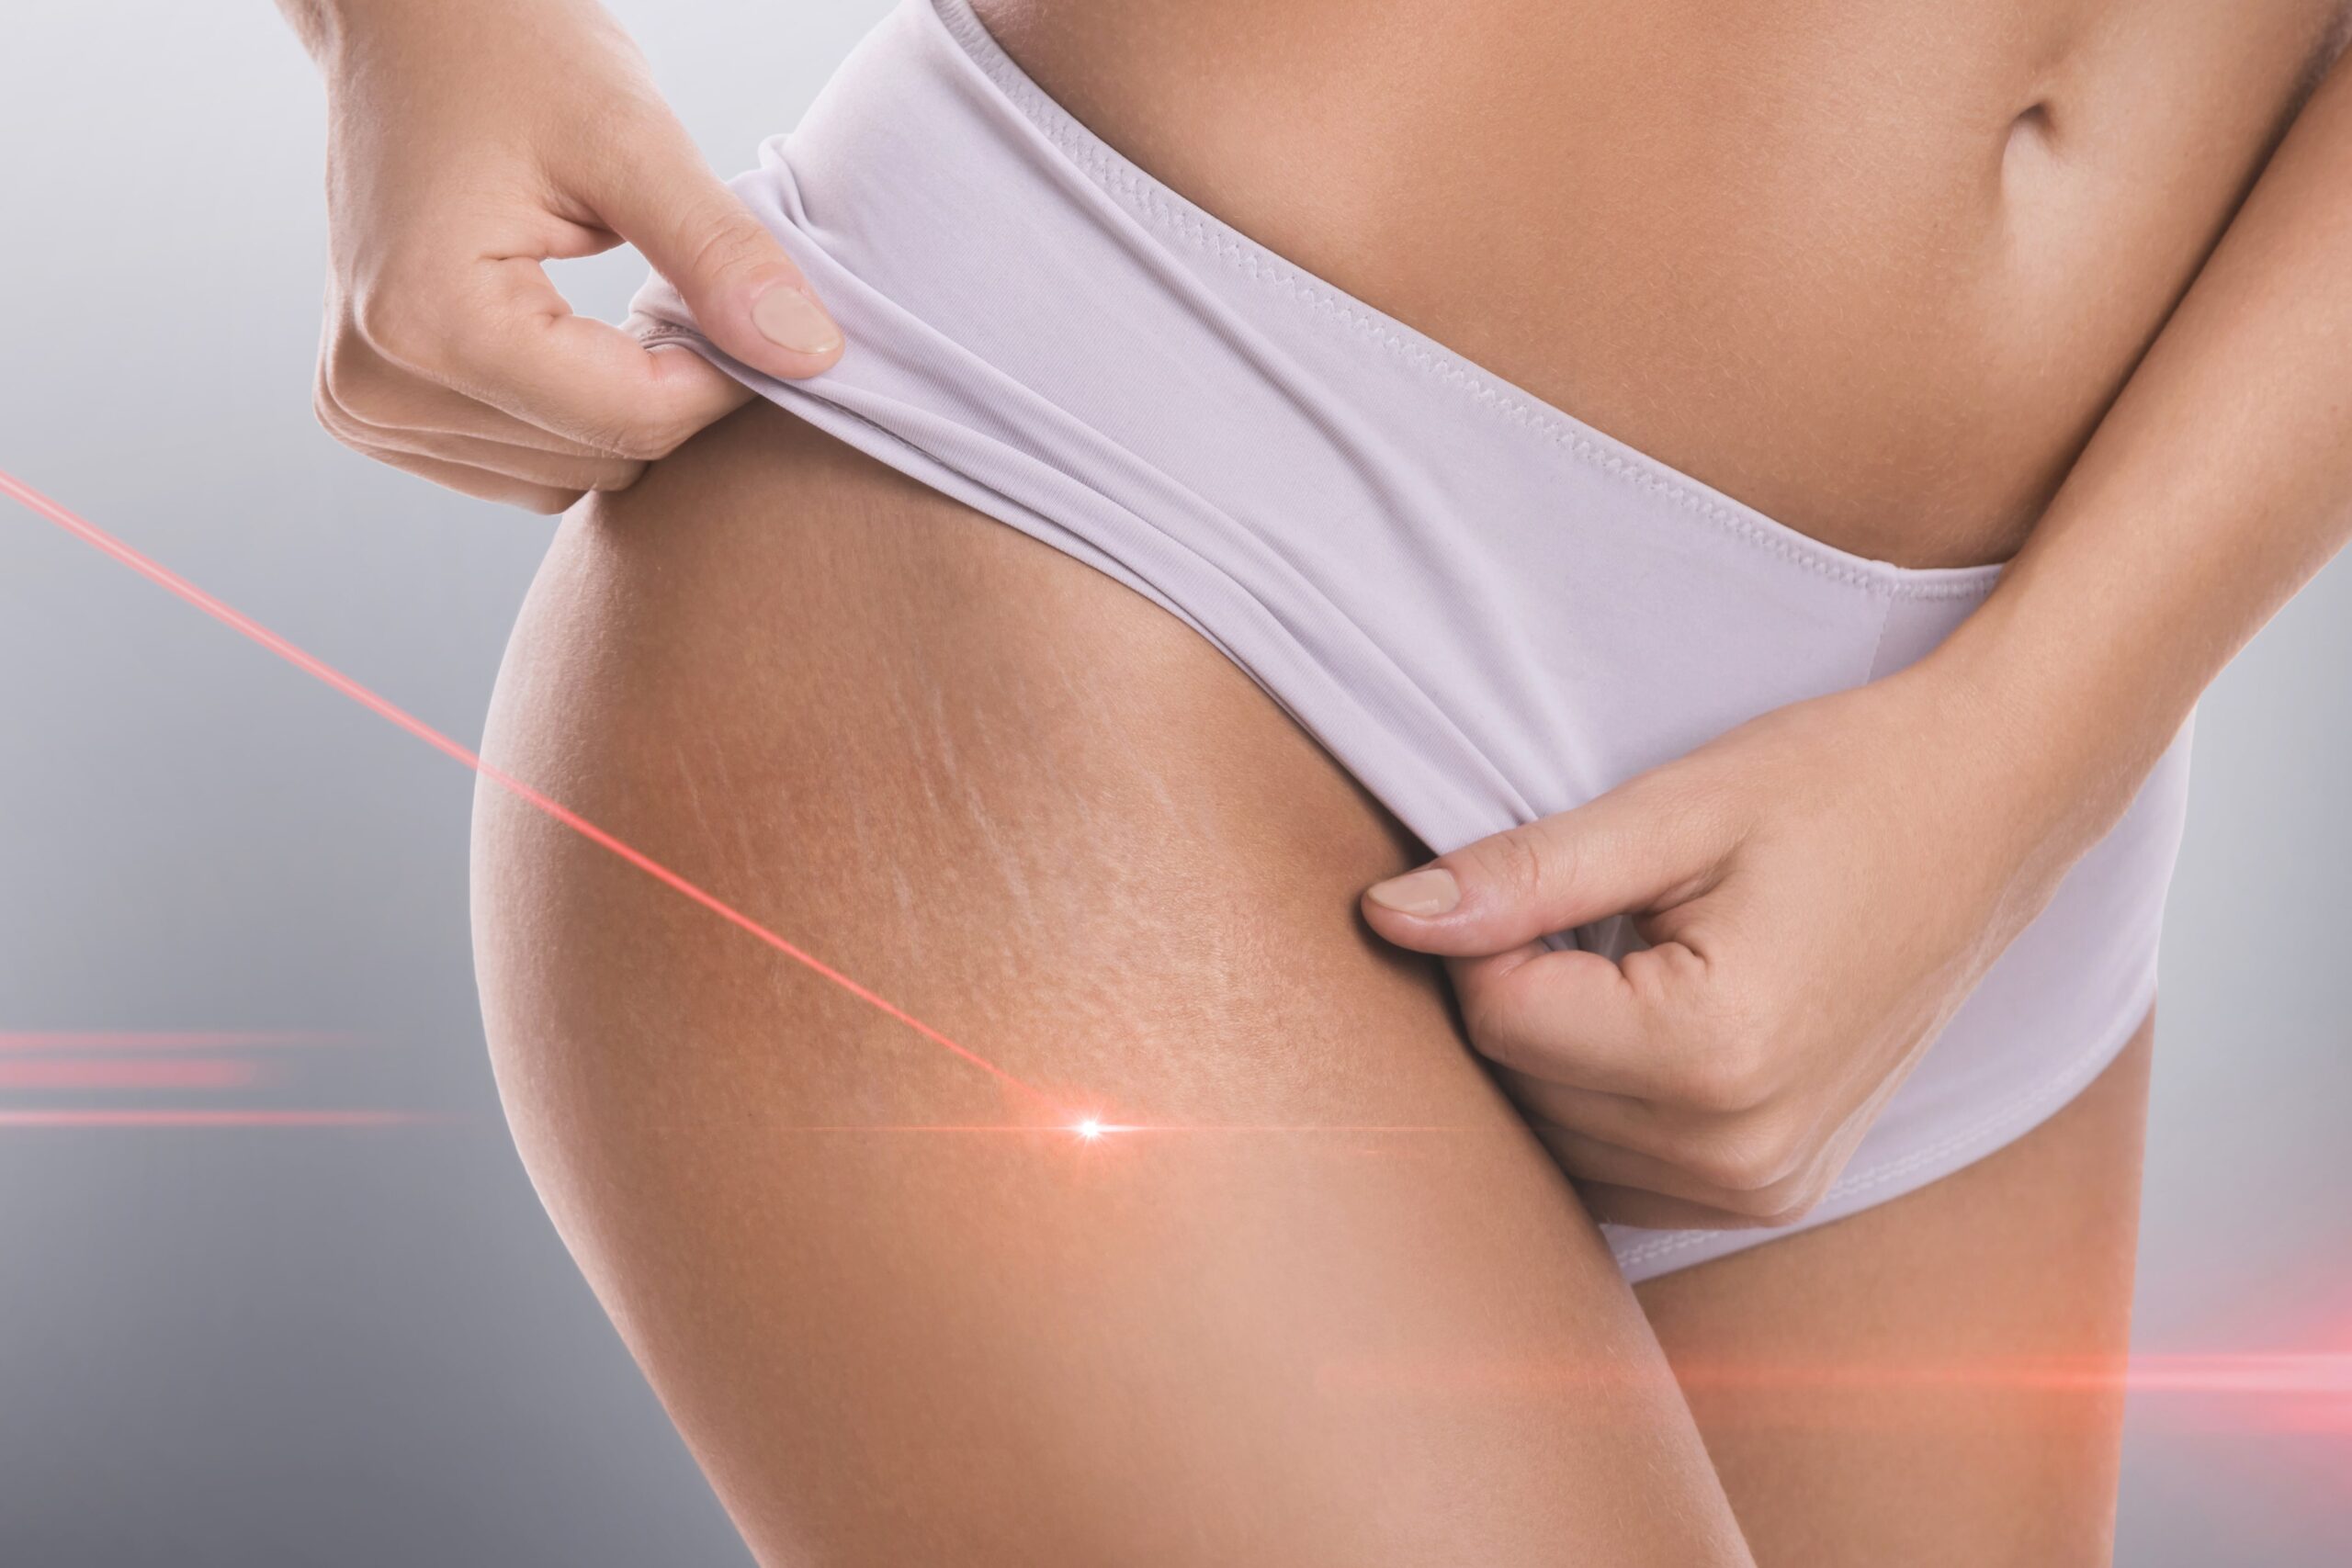 How Effective Is Laser Stretch Mark Removal?